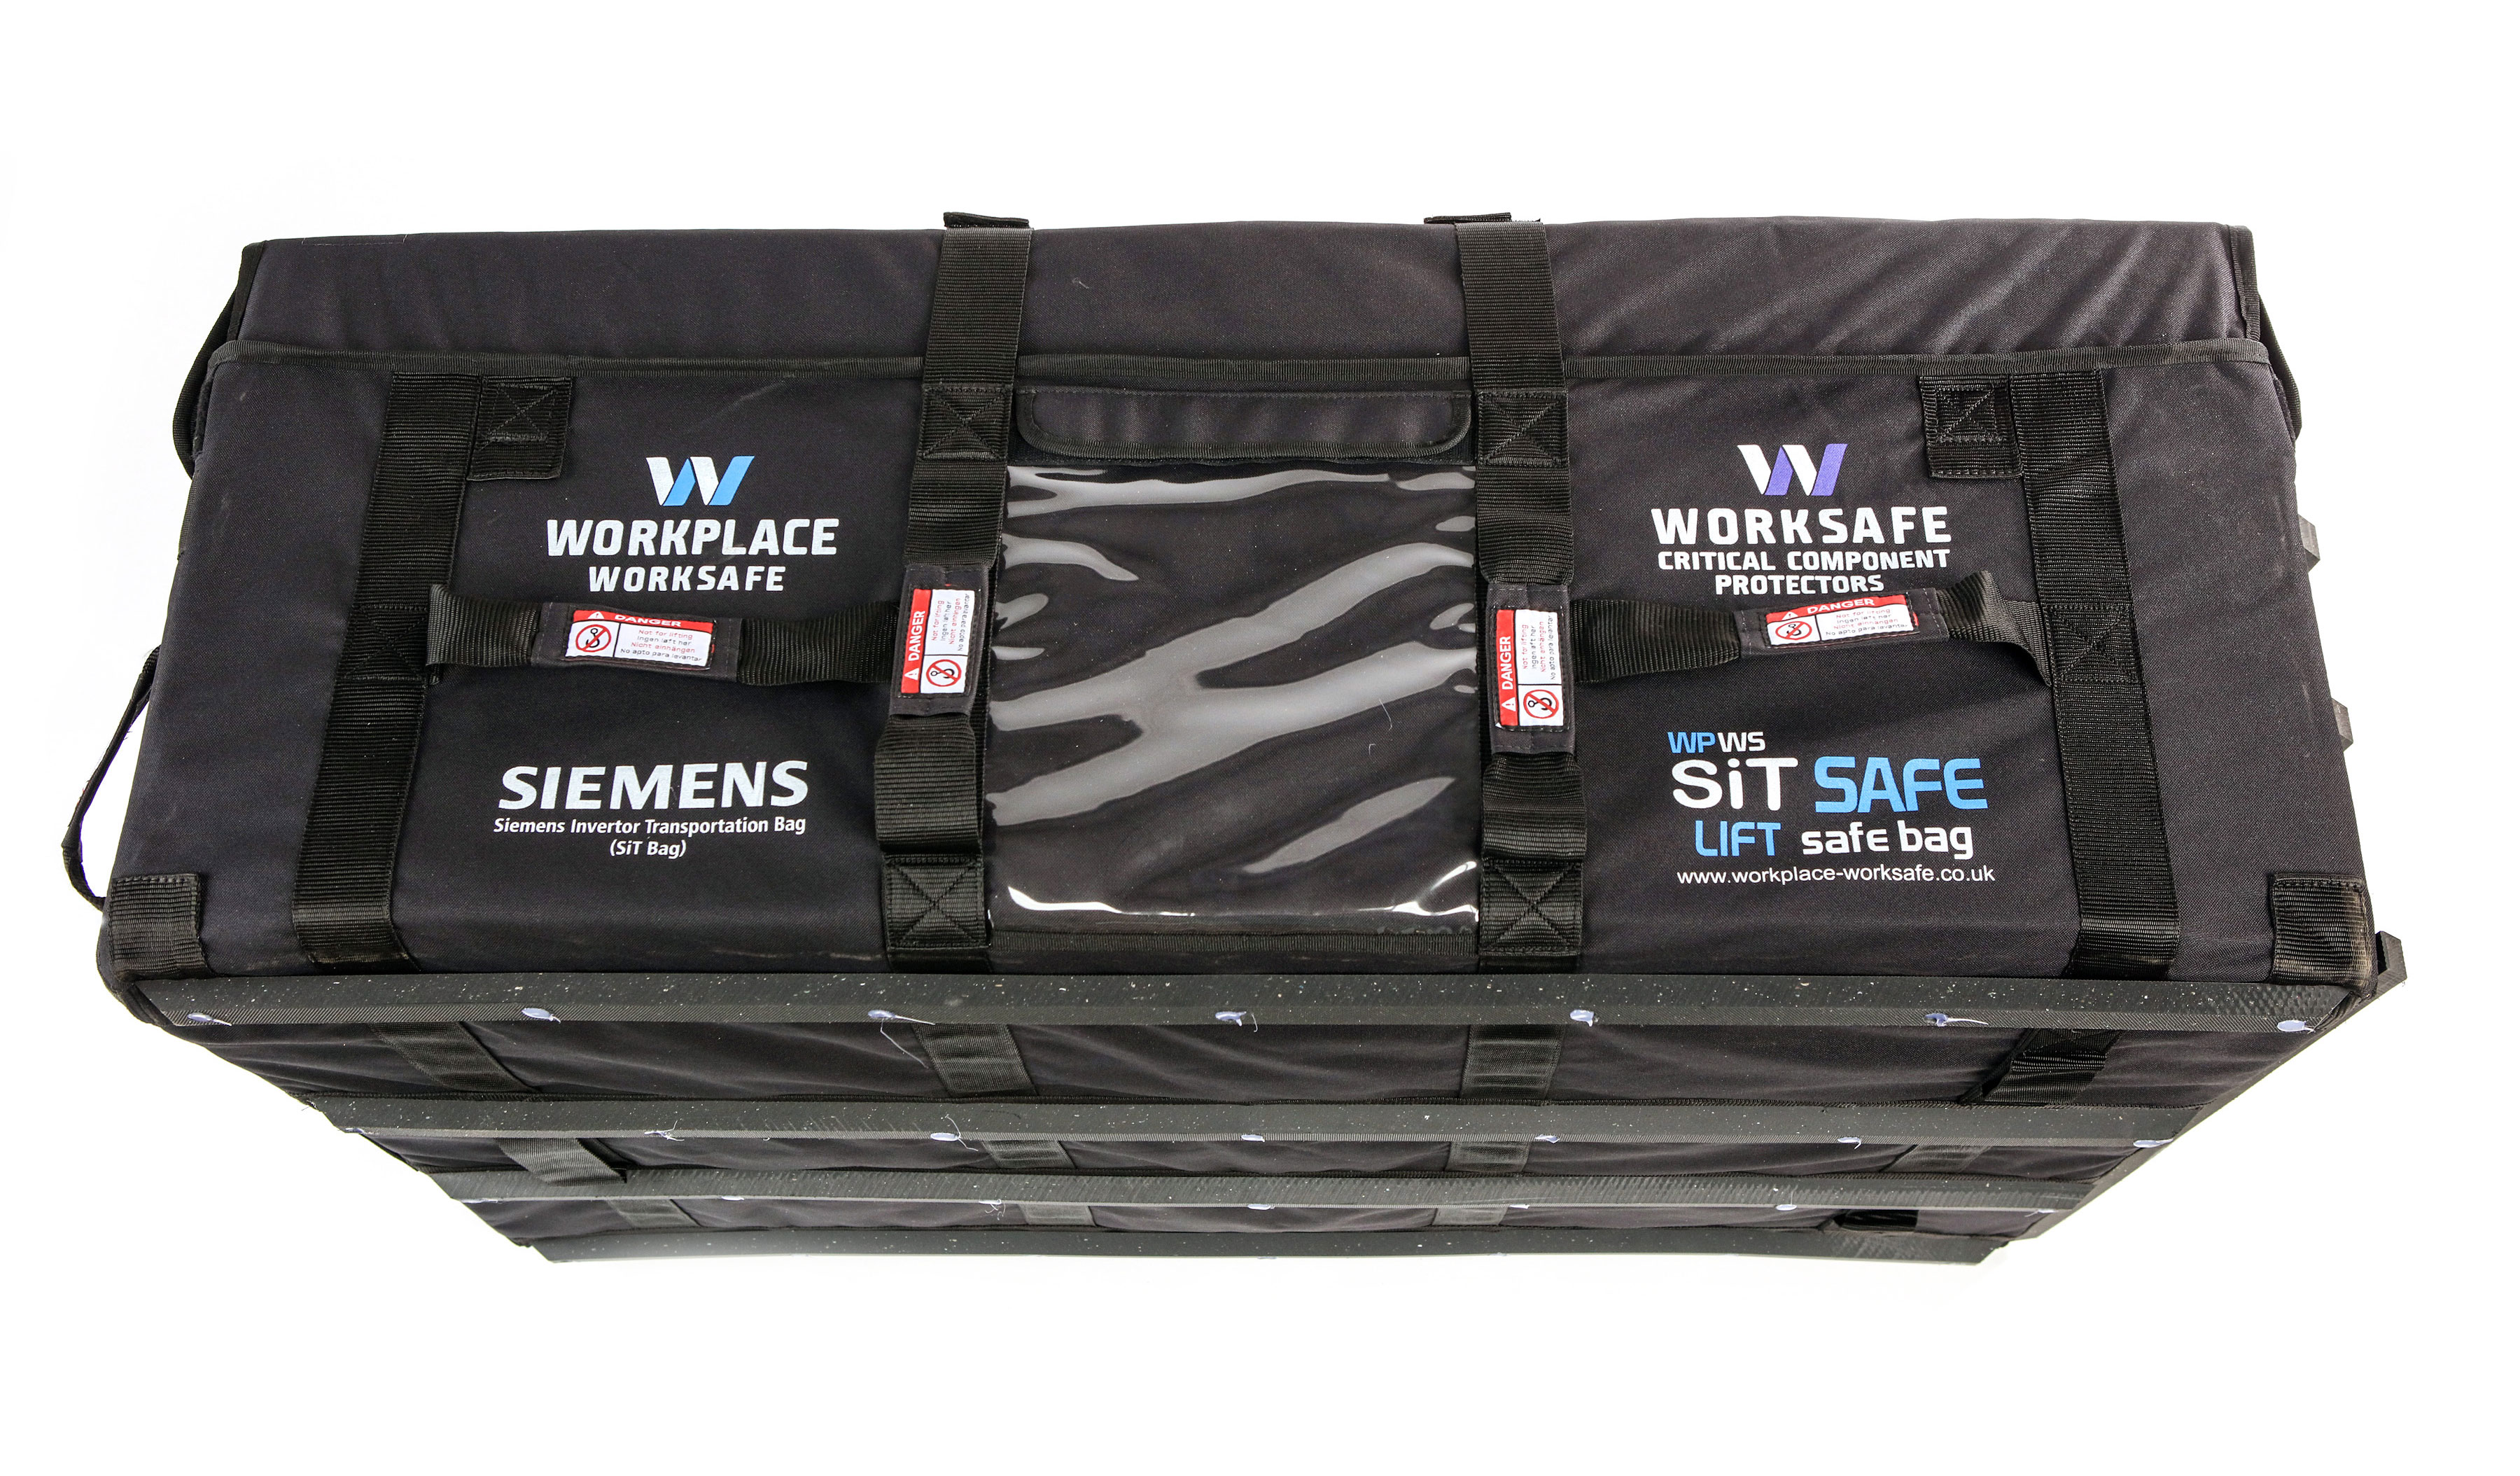 SitSAFE Protective Bag Component Protector from Windfarm Worksafe